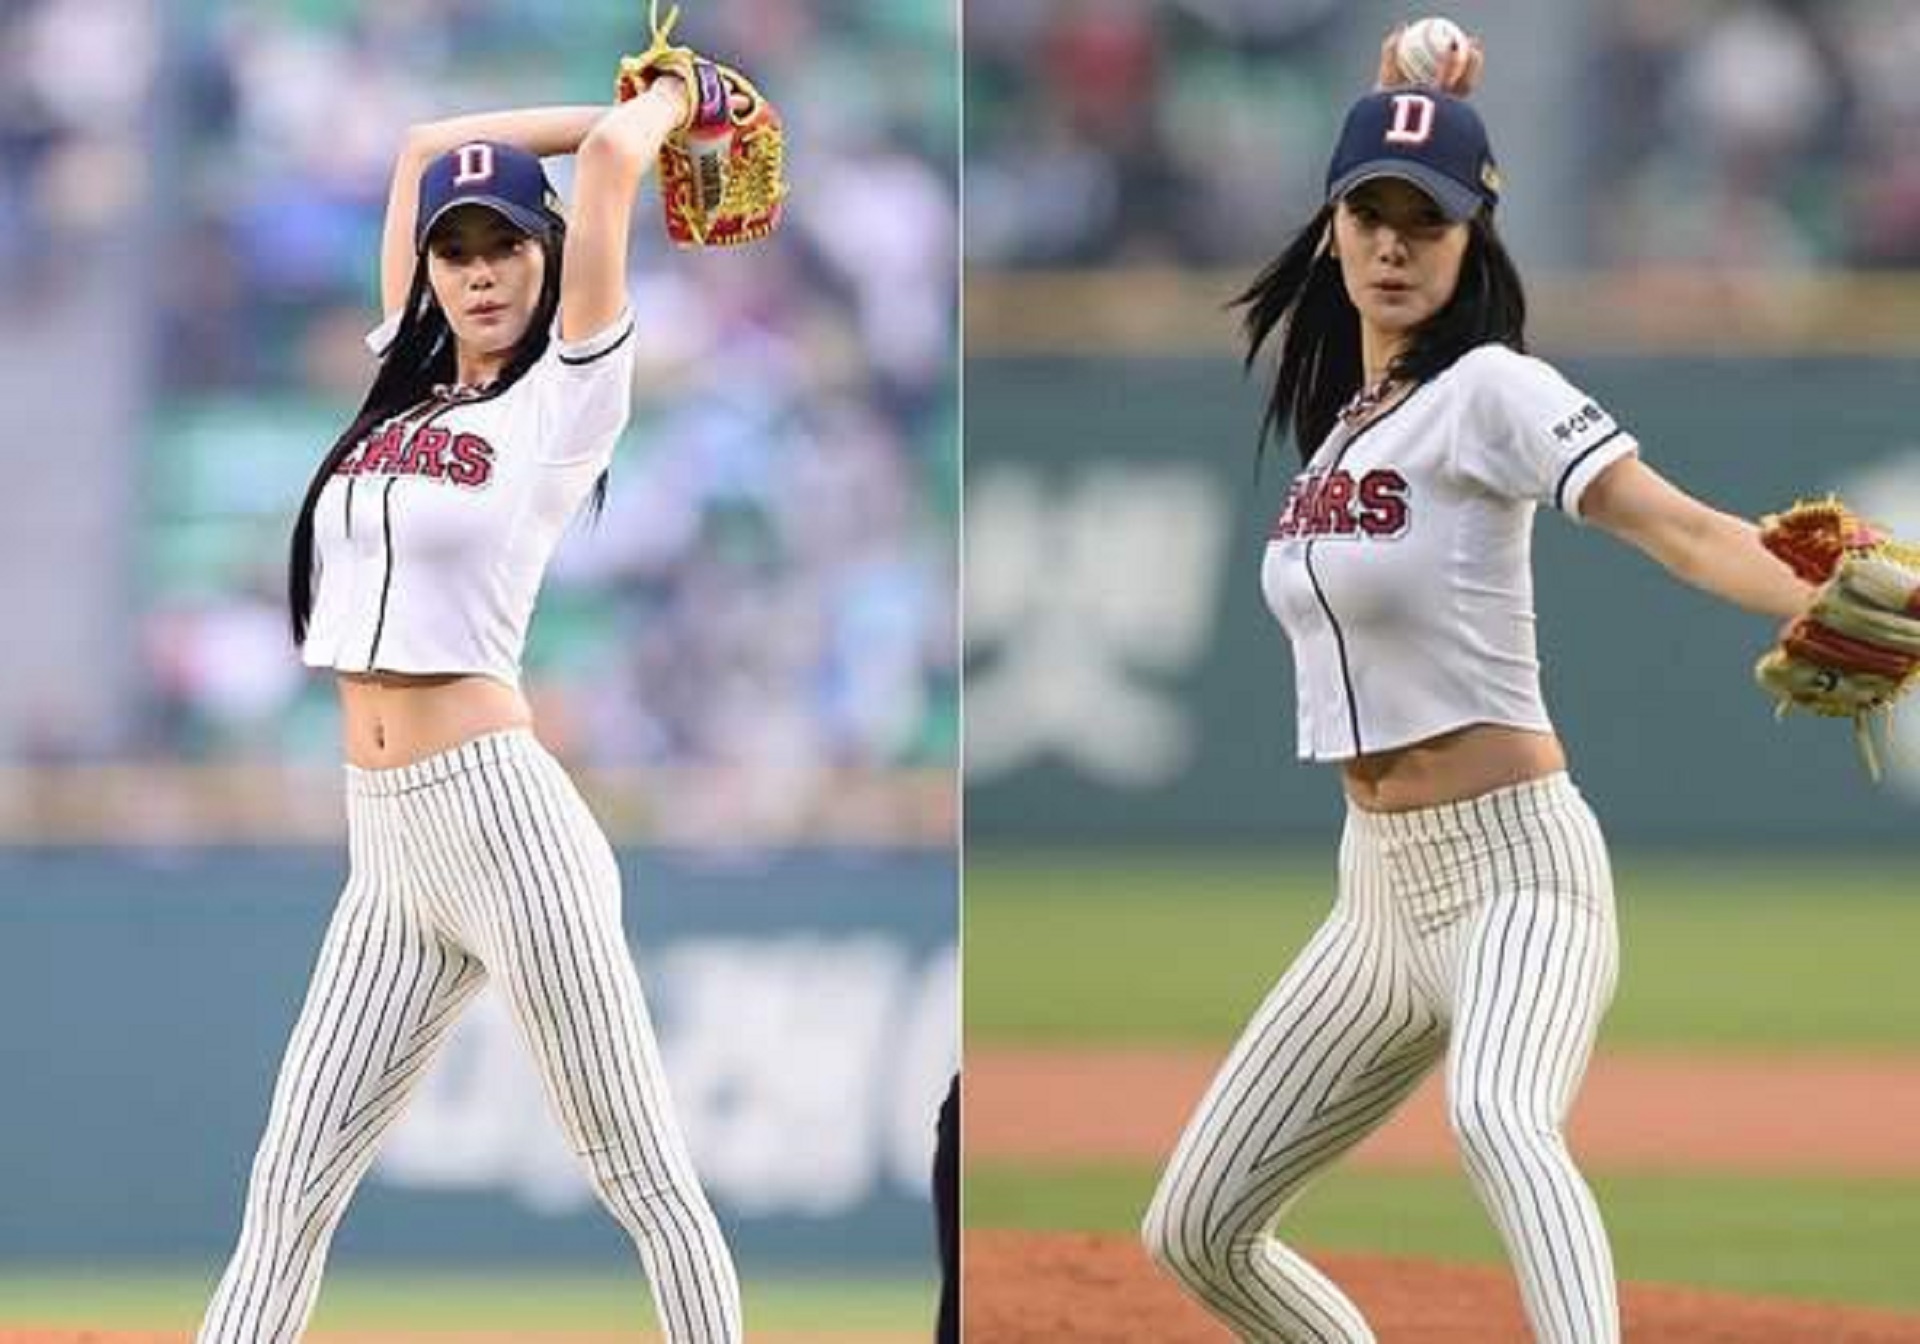 It deserves to be "Asia's No. 1 Beauty". When she saw her baseball show, she was a house goddess and a house goddess.